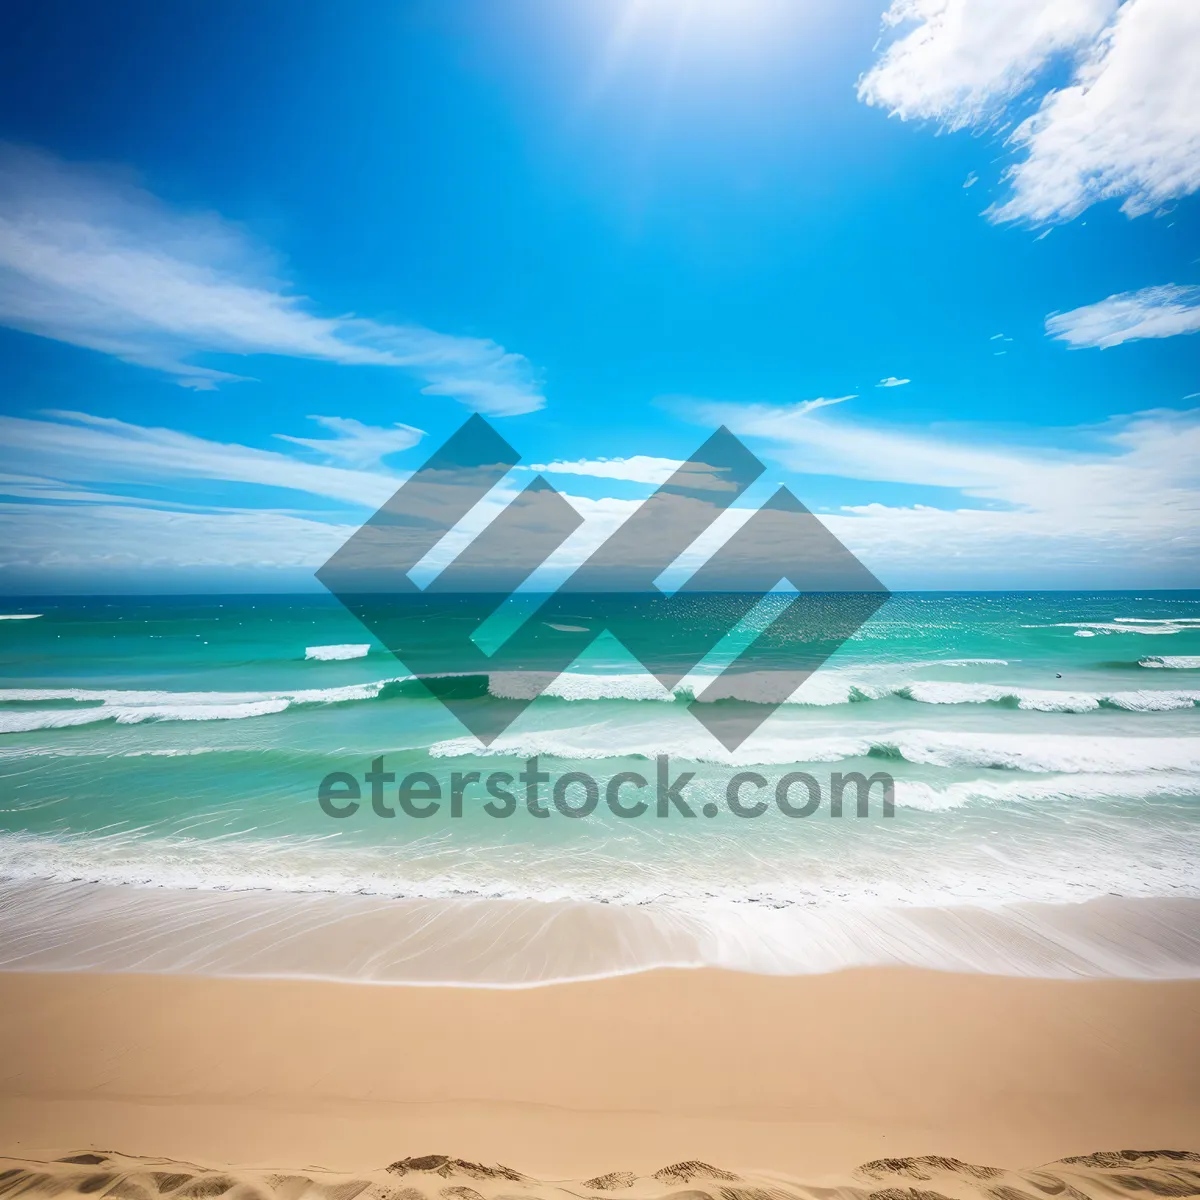 Picture of Sun-kissed Coastline under Turquoise Waves